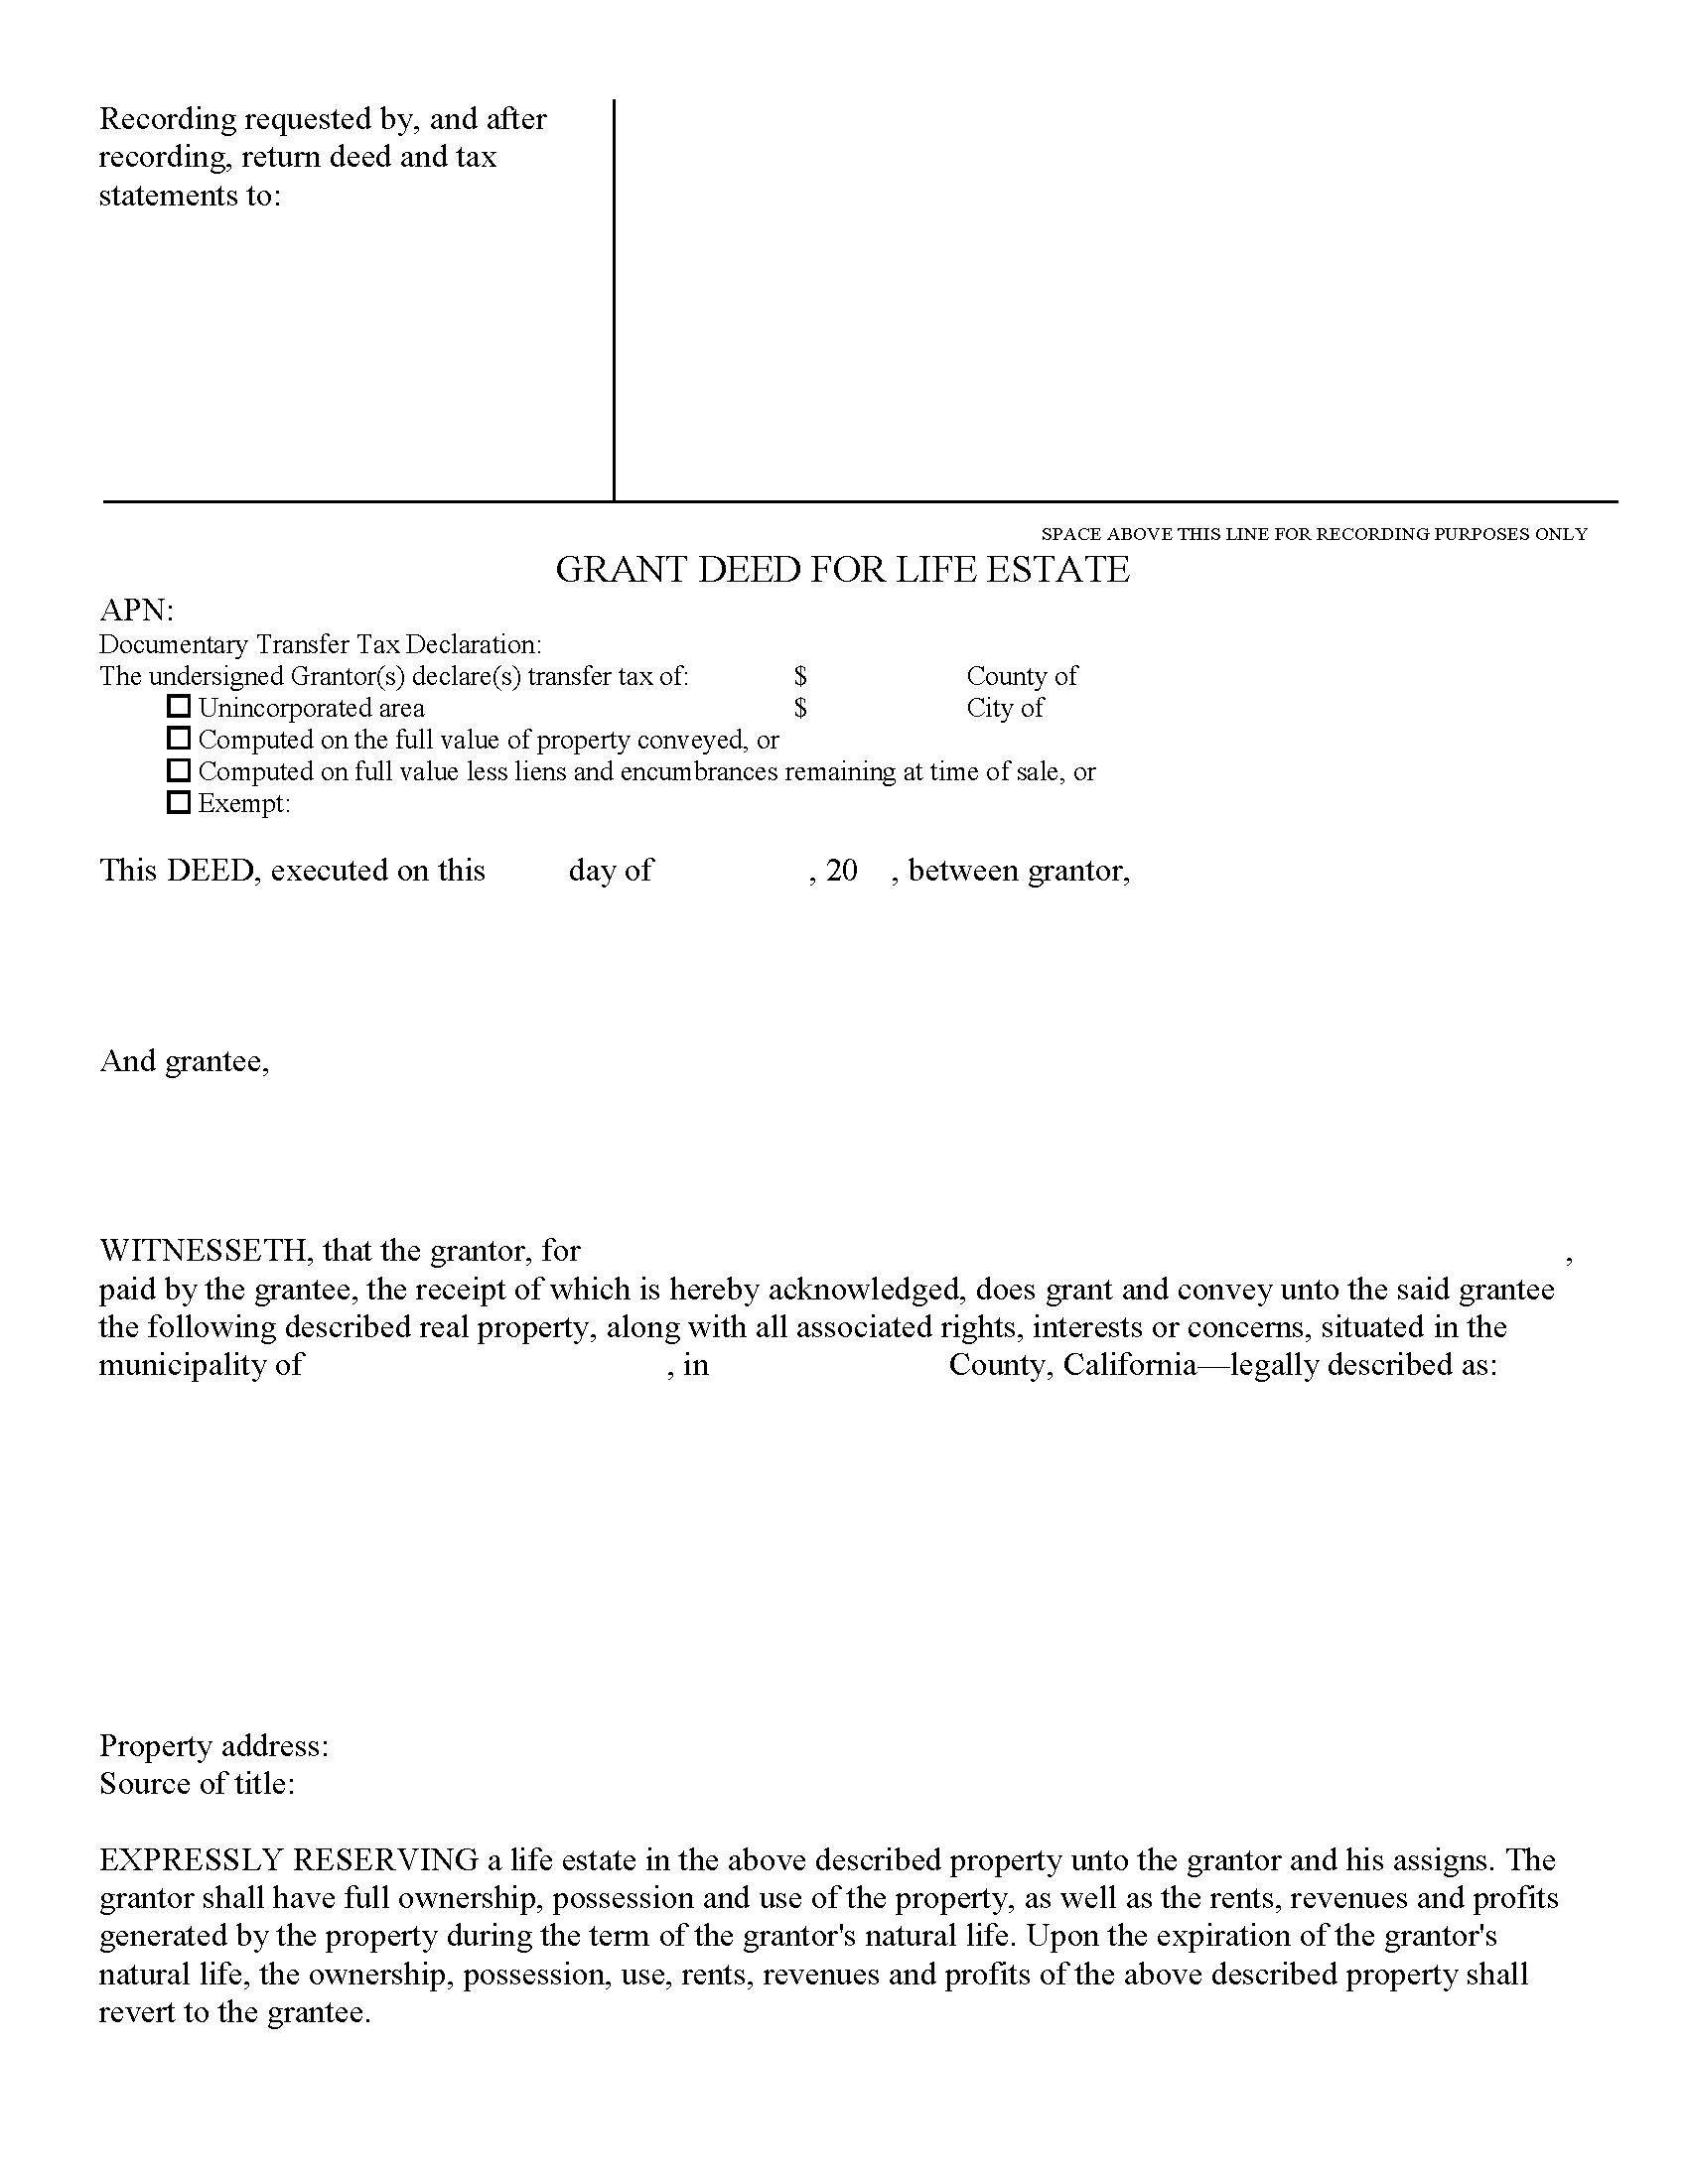 Grant Deed for Life Estate Form